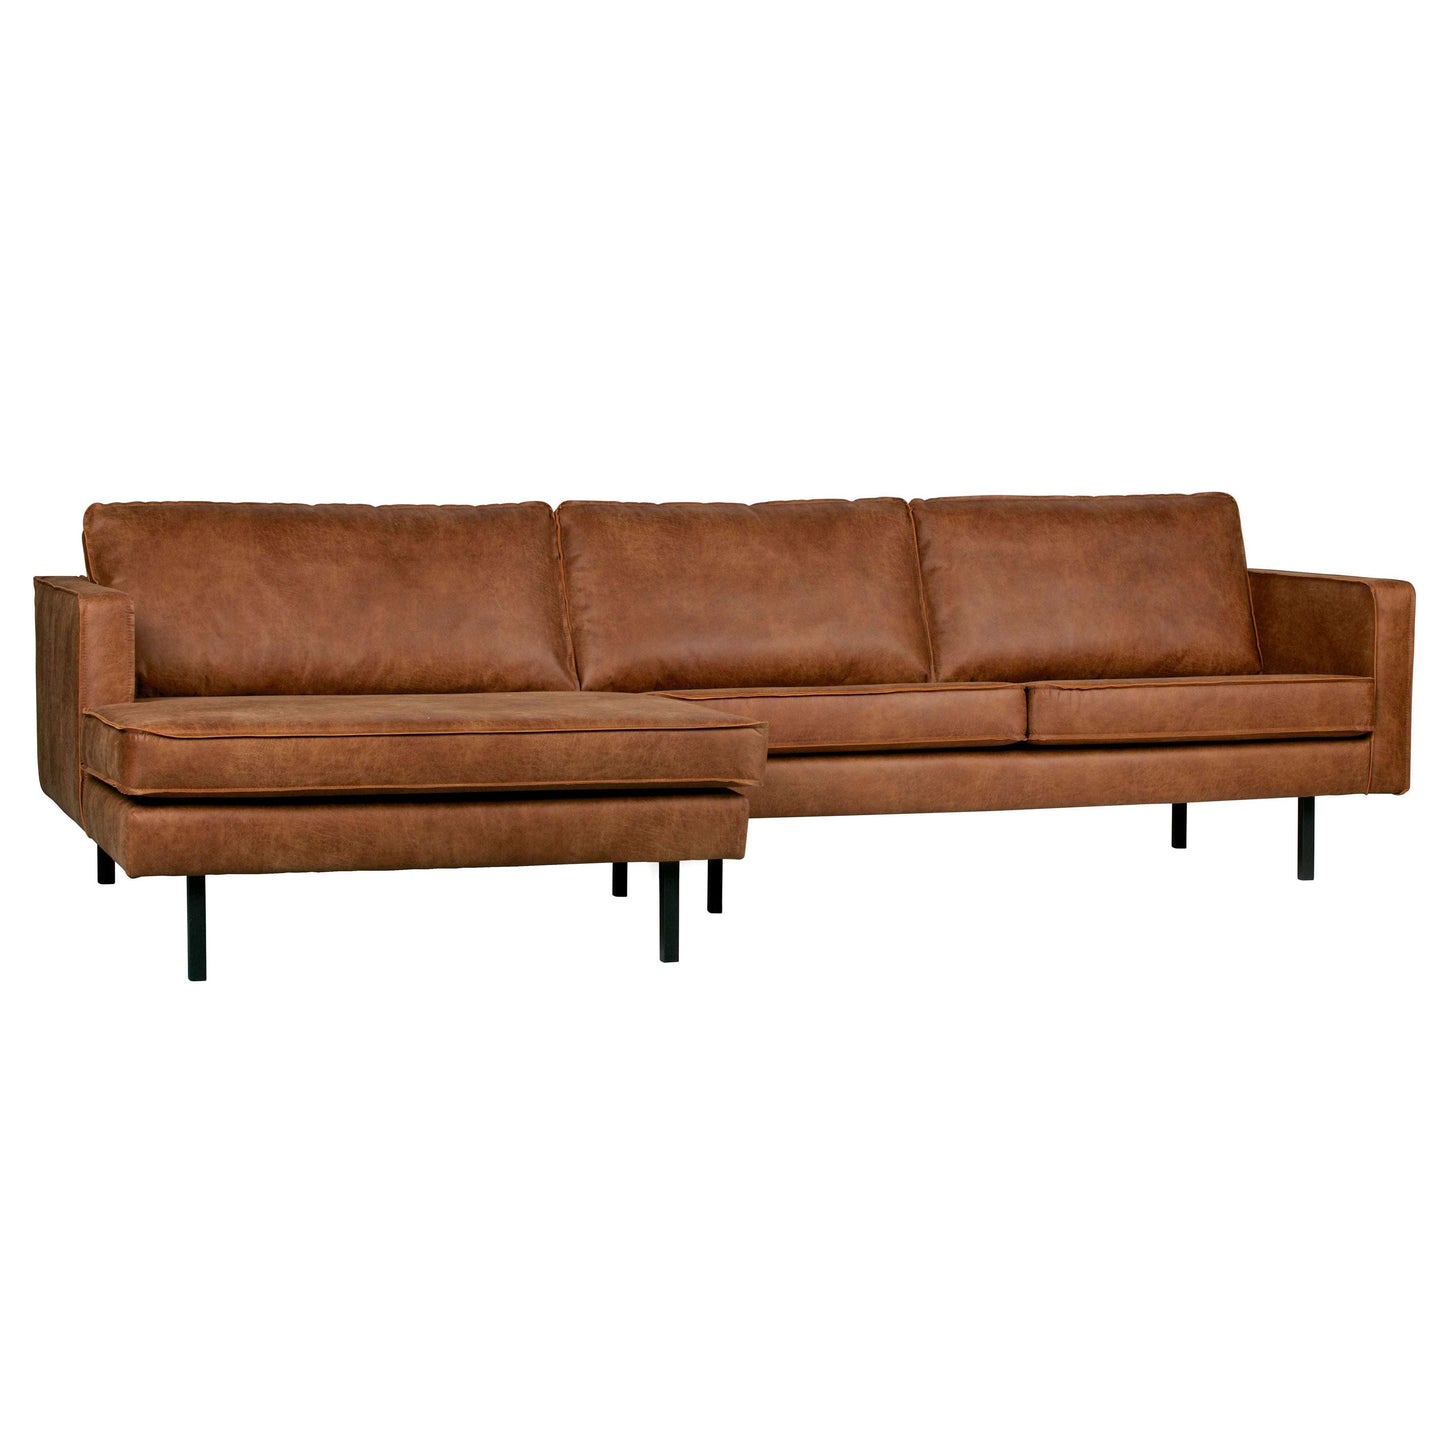 BePureHome Rodeo chaise longue links  bruin